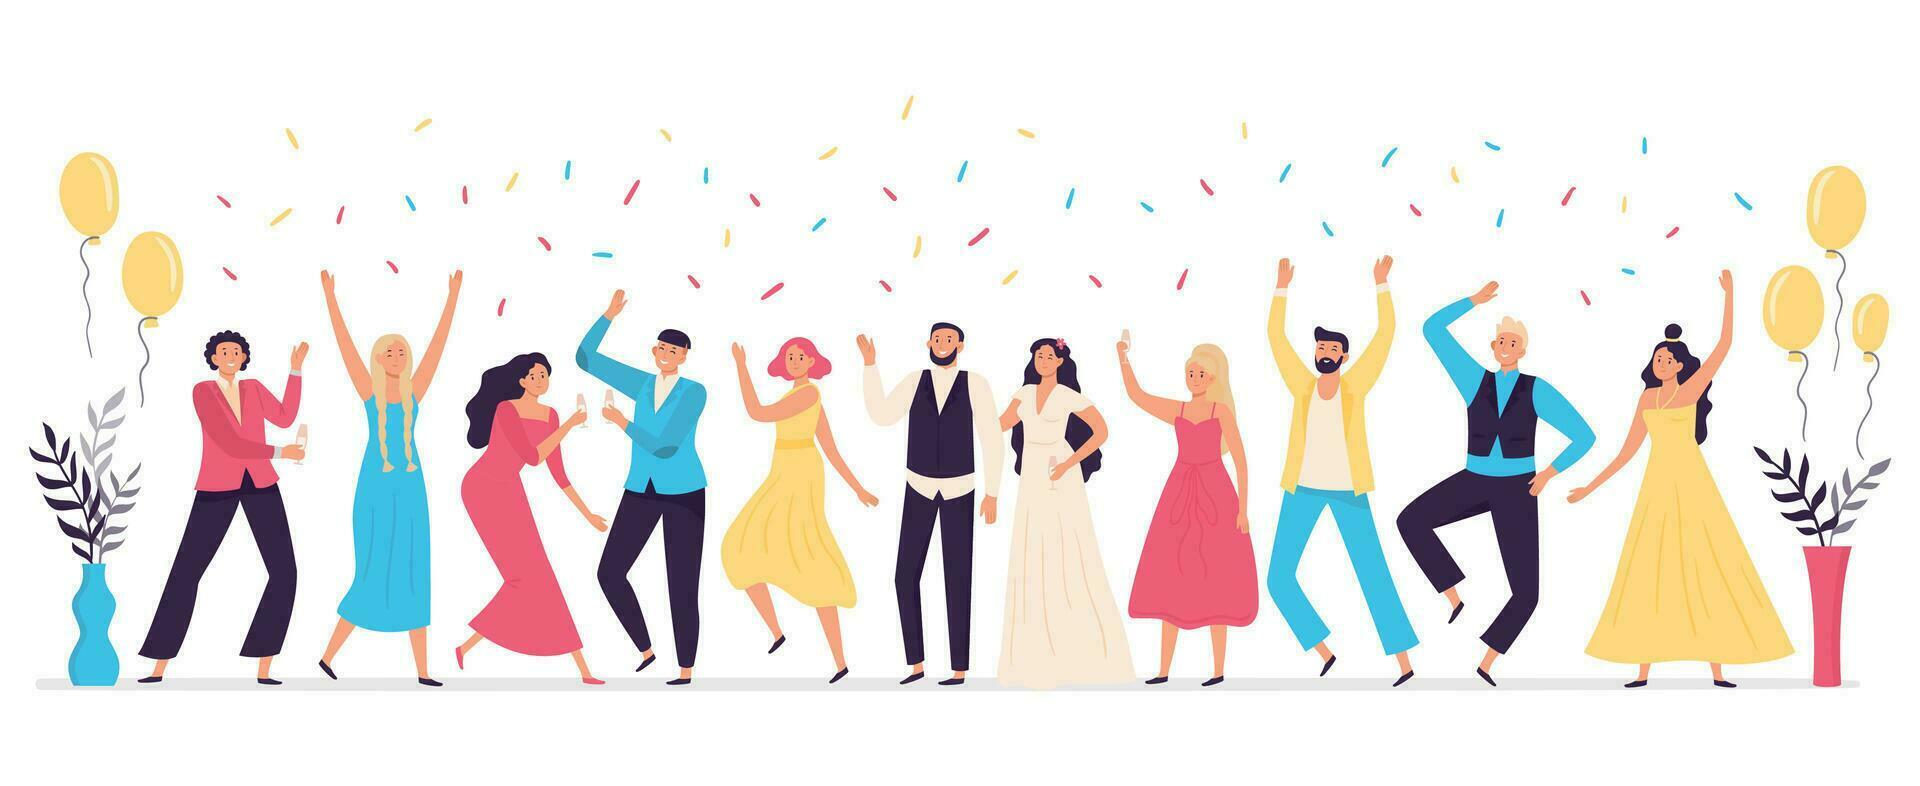 People dancing at wedding. Romance newlywed dance, traditional wedding celebration celebrating with friends and family vector illustration